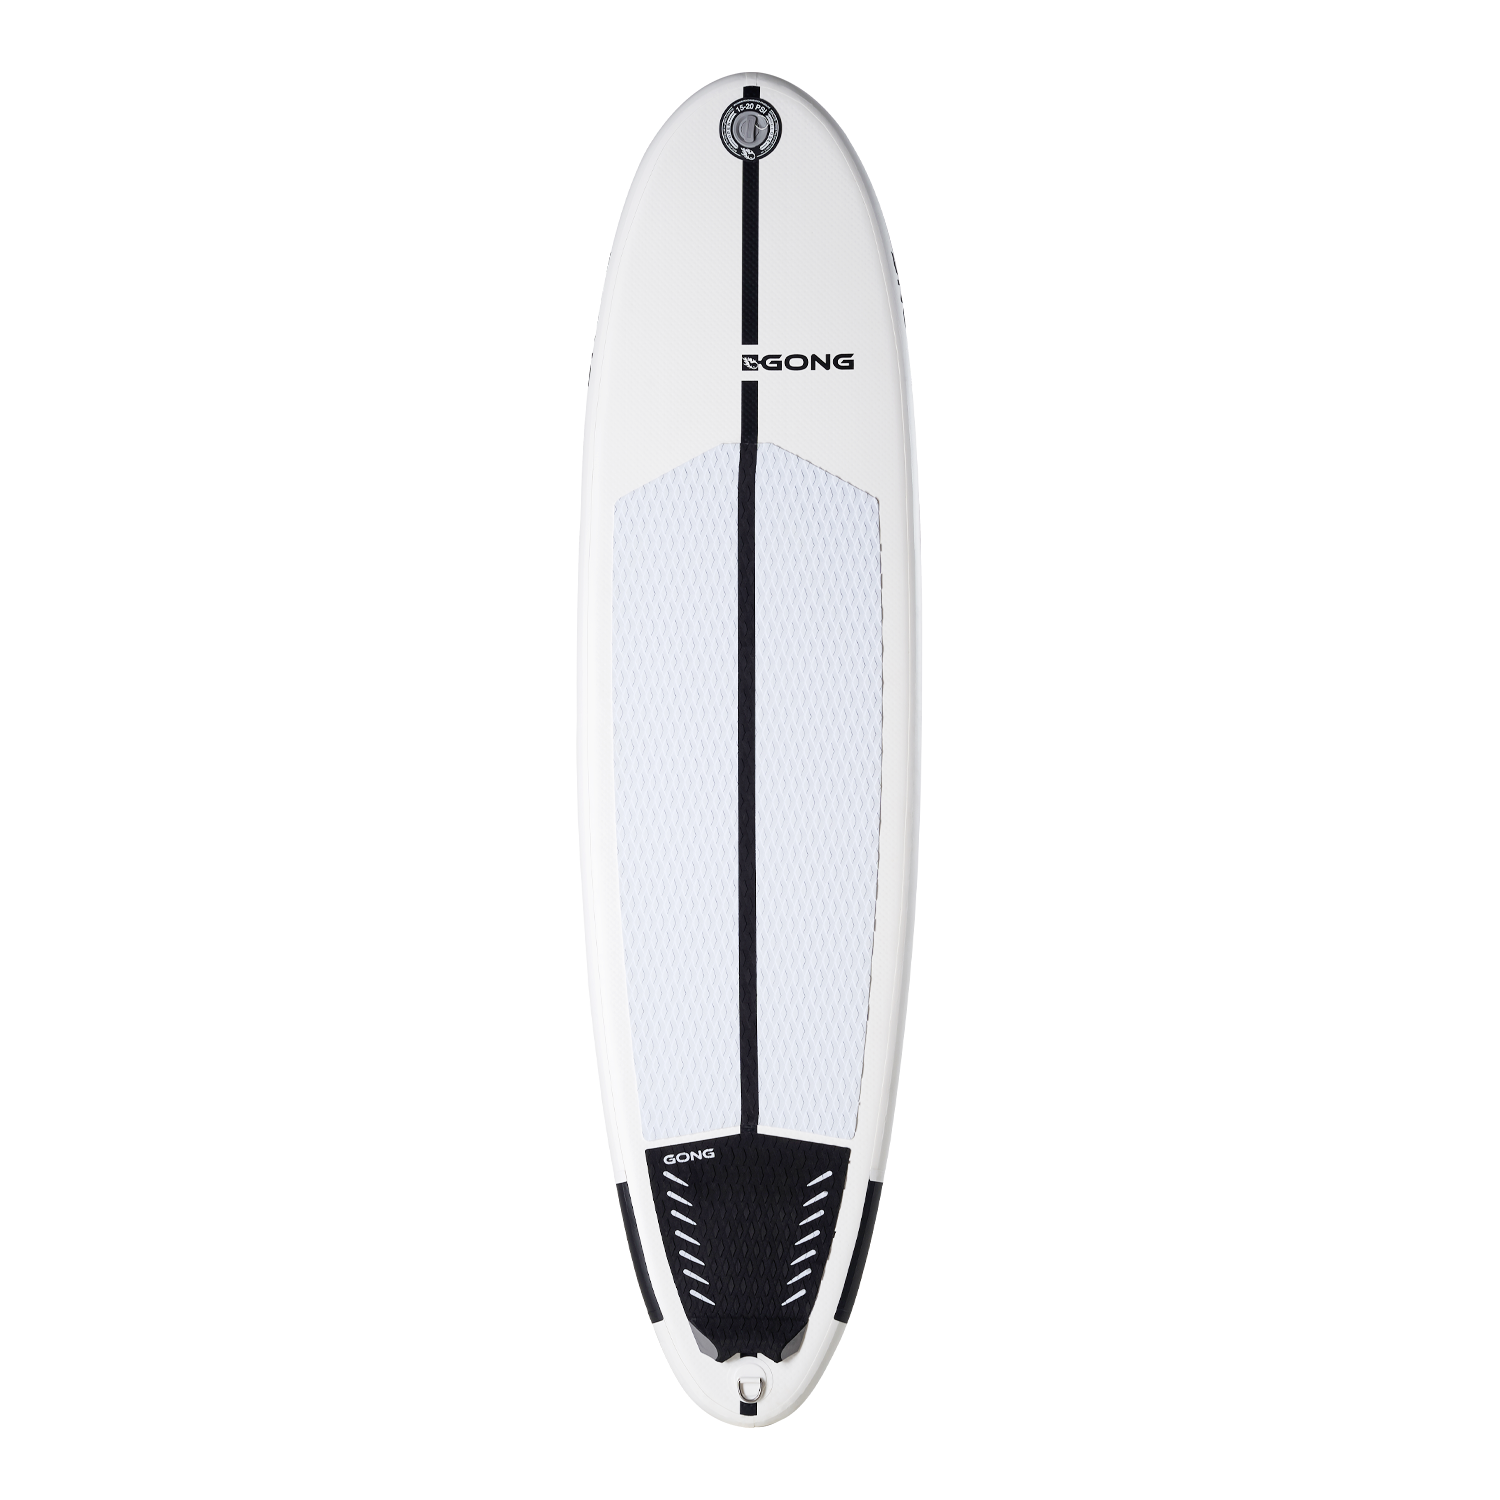 Pack Surf Inflatable Longboard